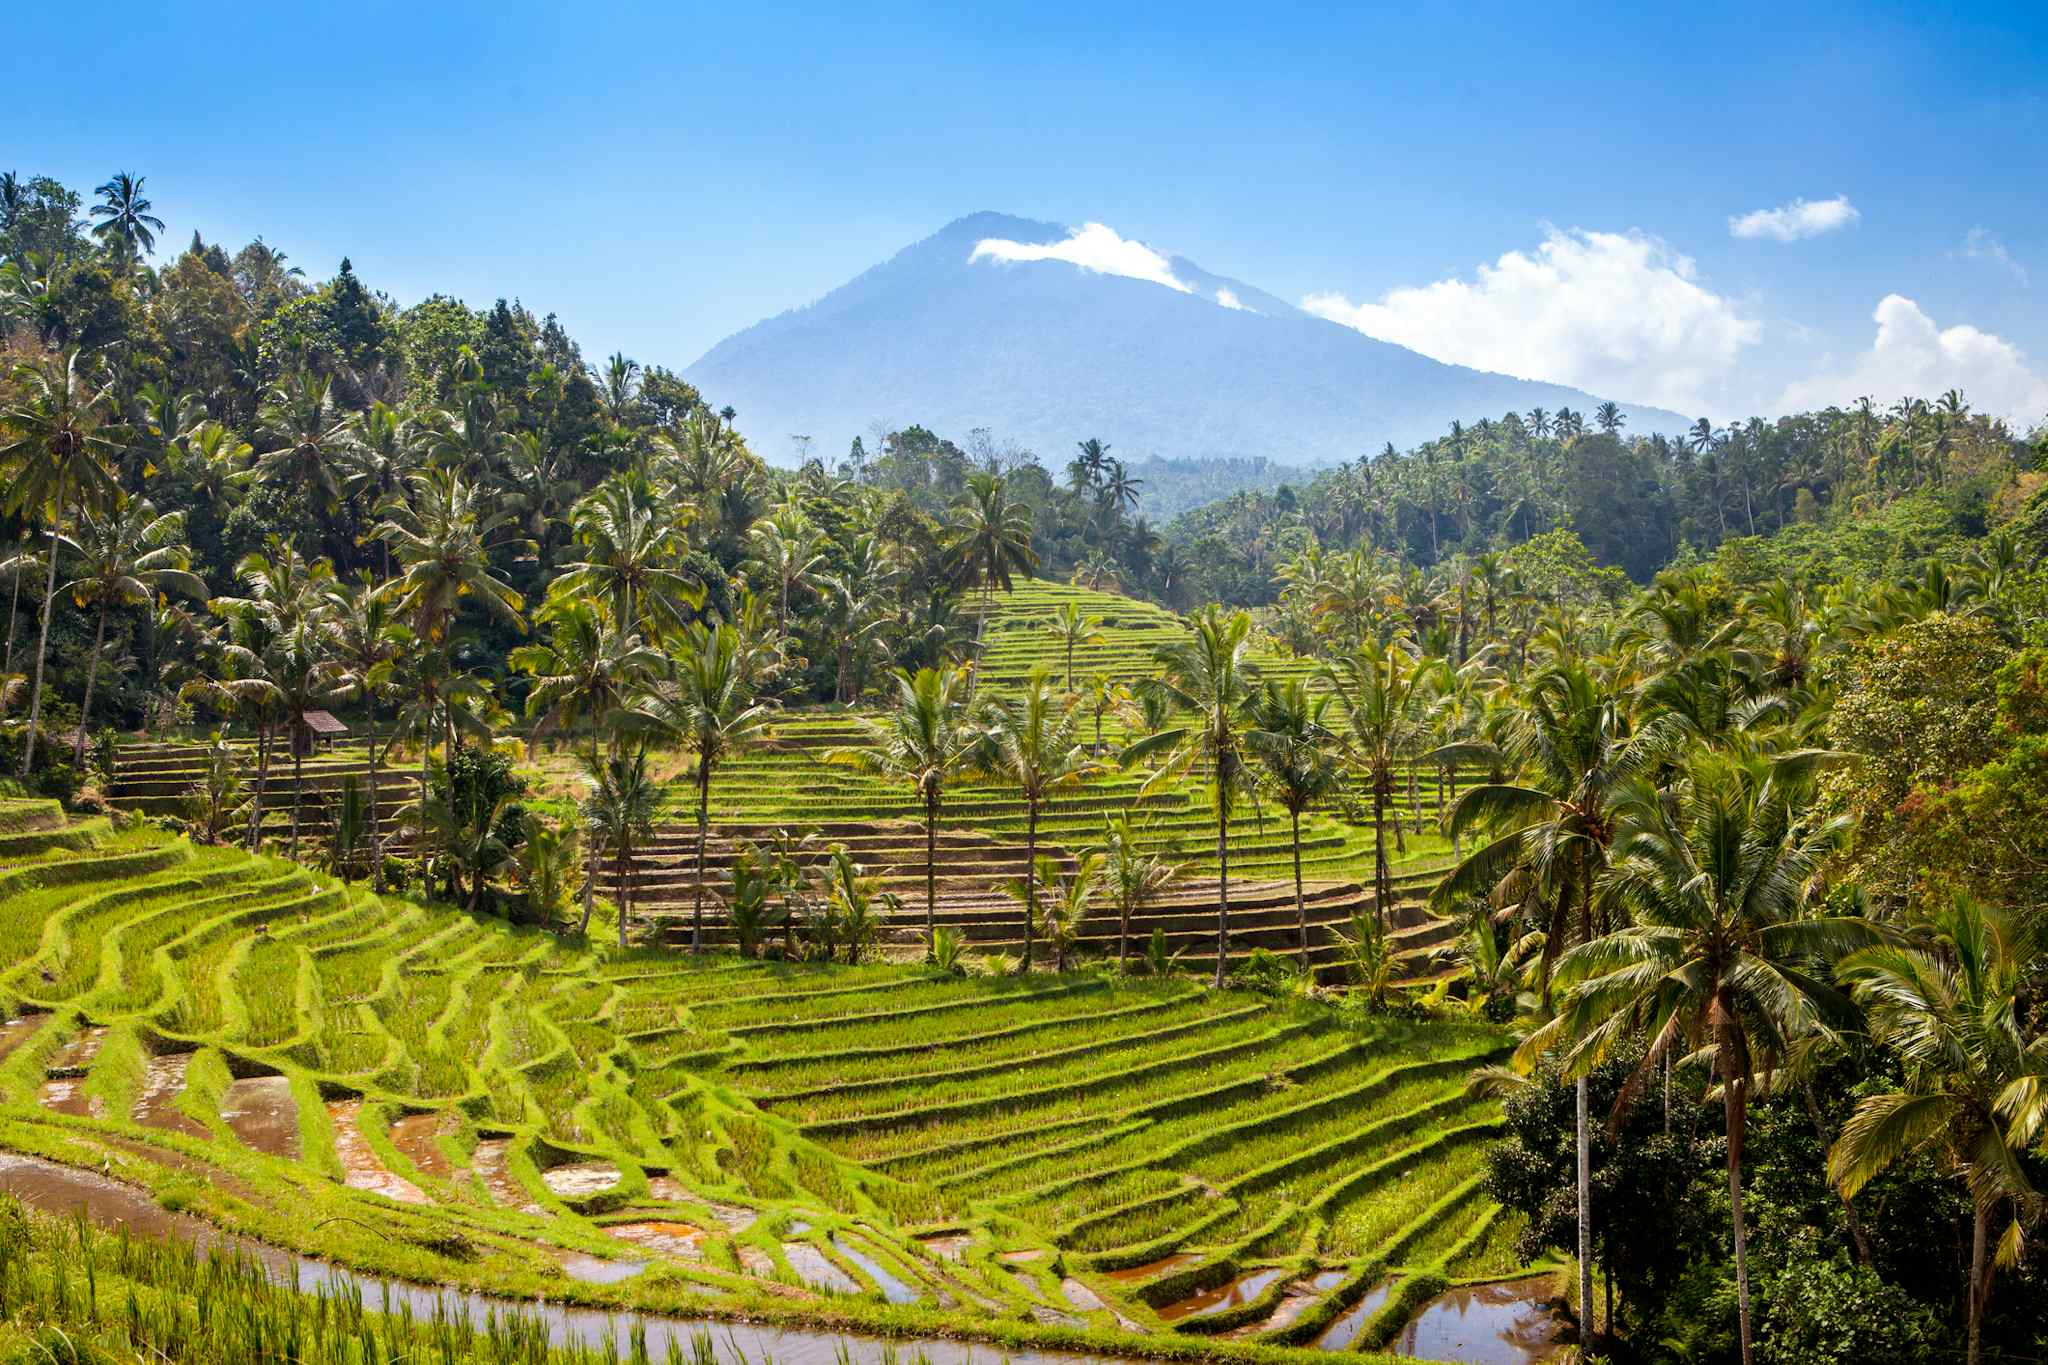 Indonesia, Bali, rice terraces paddies fields in Blimbing region with Mount Batukaru volcano in background. Photo: GettyImages-1411604885